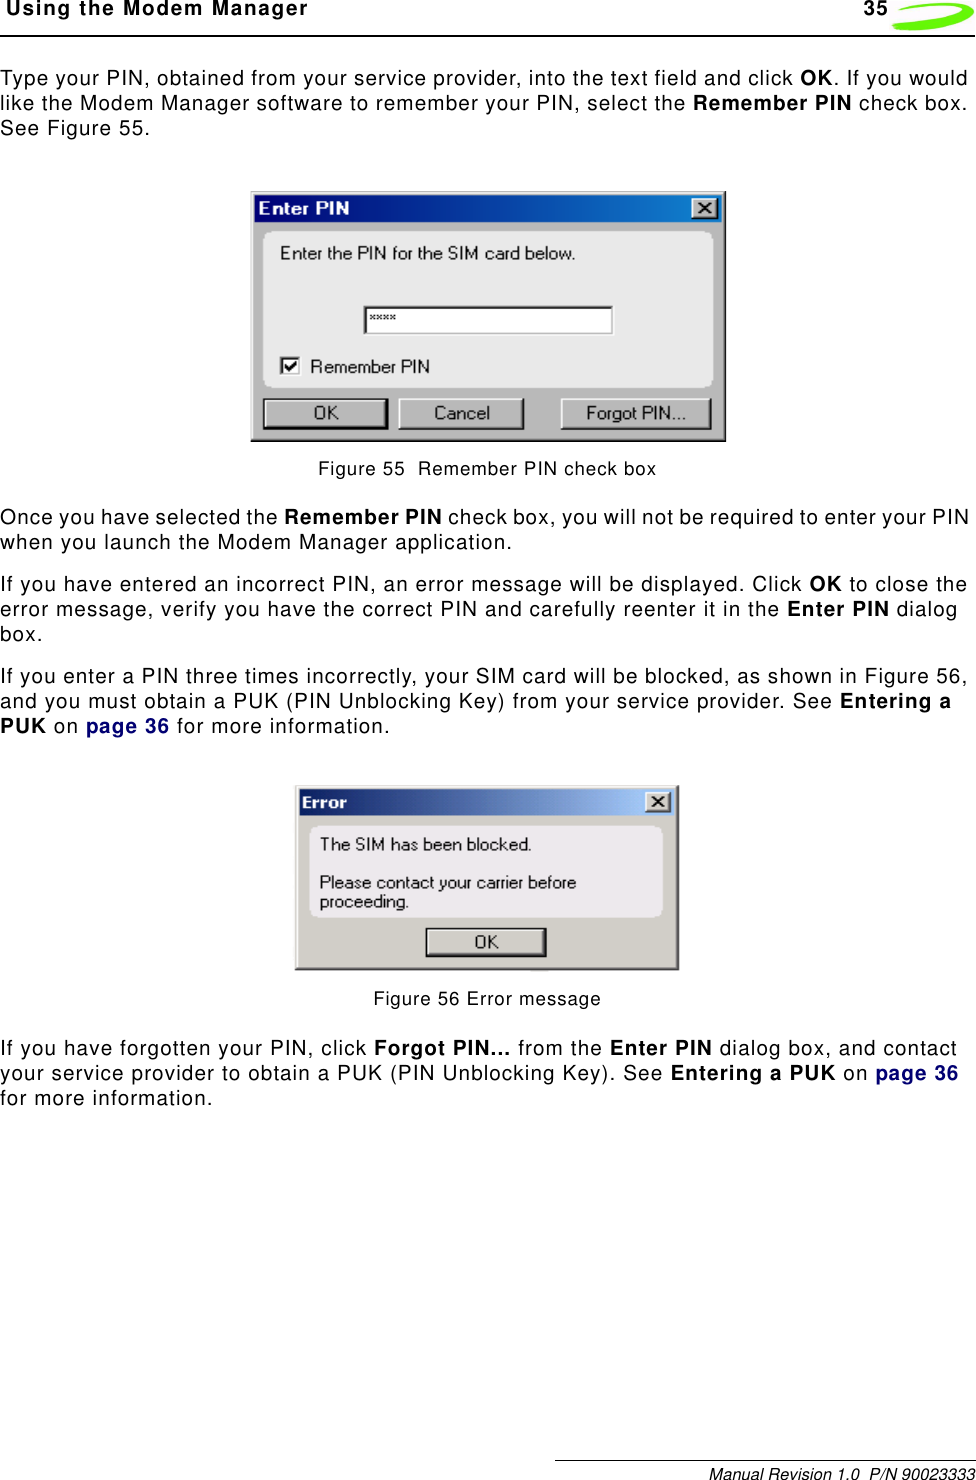  Using the Modem Manager 35Manual Revision 1.0  P/N 90023333Type your PIN, obtained from your service provider, into the text field and click OK. If you would like the Modem Manager software to remember your PIN, select the Remember PIN check box. See Figure 55.Figure 55  Remember PIN check boxOnce you have selected the Remember PIN check box, you will not be required to enter your PIN when you launch the Modem Manager application.If you have entered an incorrect PIN, an error message will be displayed. Click OK to close the error message, verify you have the correct PIN and carefully reenter it in the Enter PIN dialog box. If you enter a PIN three times incorrectly, your SIM card will be blocked, as shown in Figure 56, and you must obtain a PUK (PIN Unblocking Key) from your service provider. See Entering a PUK on page 36 for more information.Figure 56 Error messageIf you have forgotten your PIN, click Forgot PIN... from the Enter PIN dialog box, and contact your service provider to obtain a PUK (PIN Unblocking Key). See Entering a PUK on page 36 for more information.